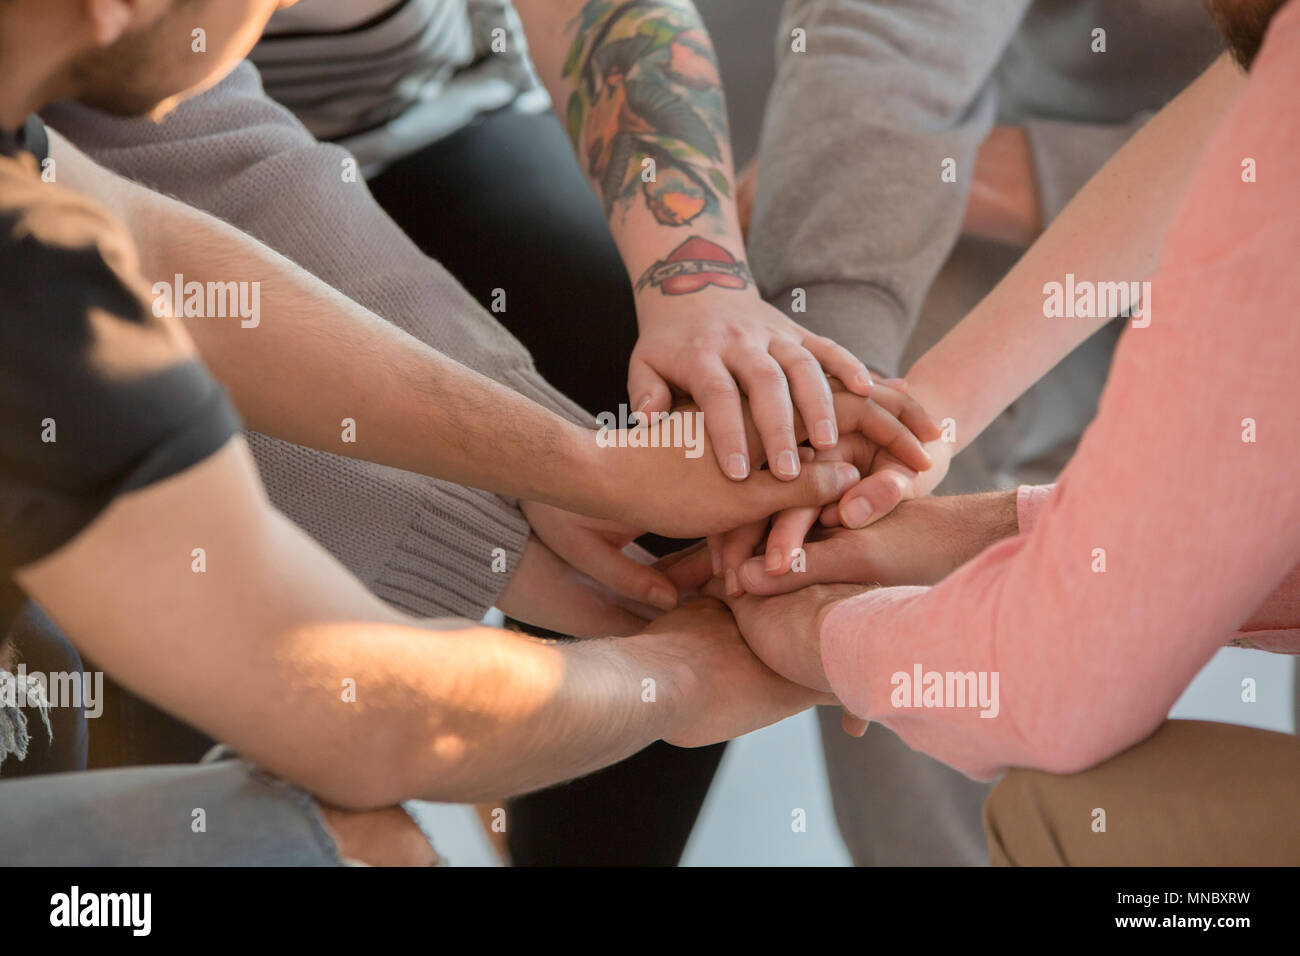 Group of people holding their hands together, close up Stock Photo